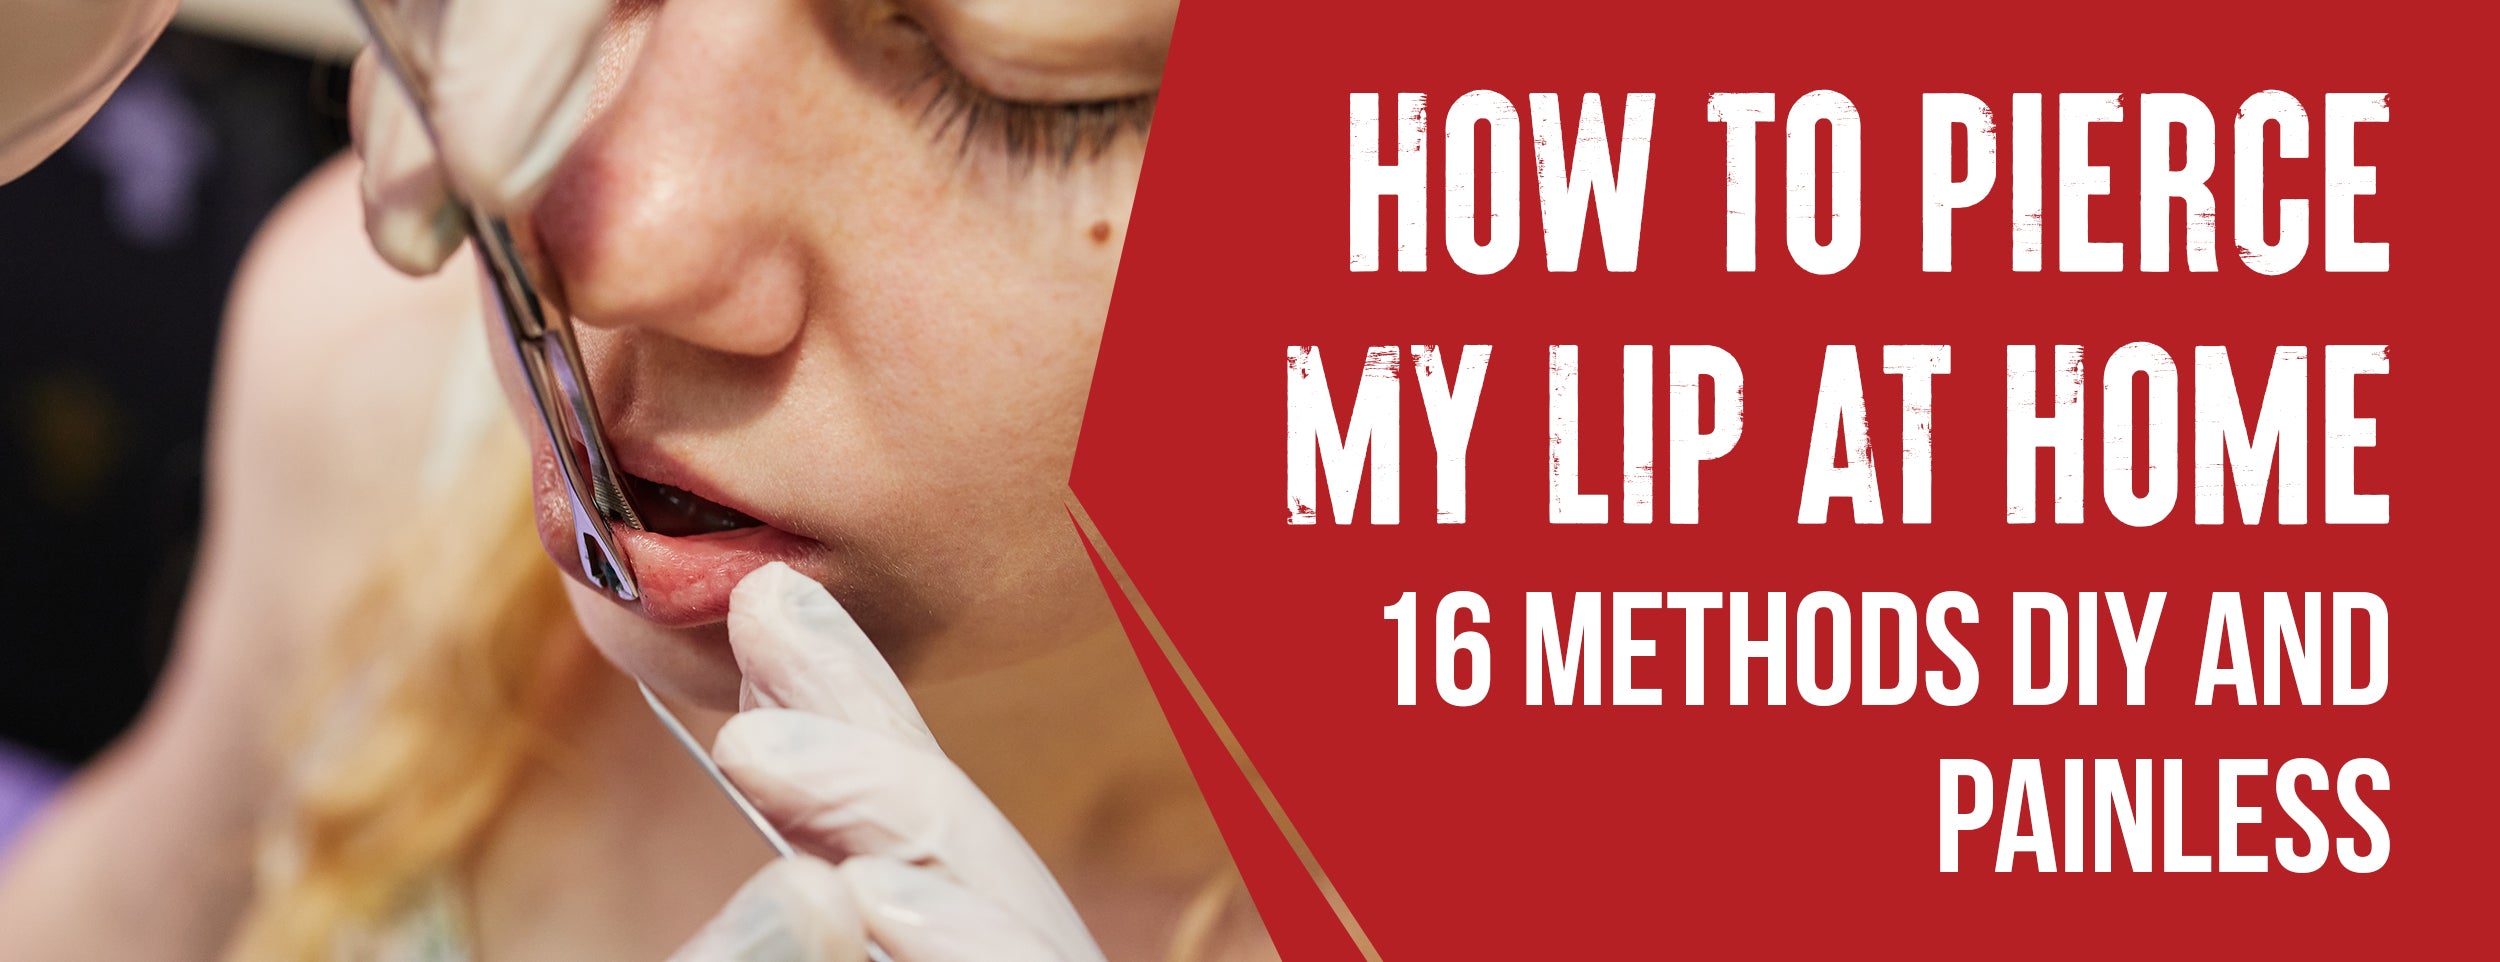 The 16 Best and Painless Ways To Pierce My Lip At Home